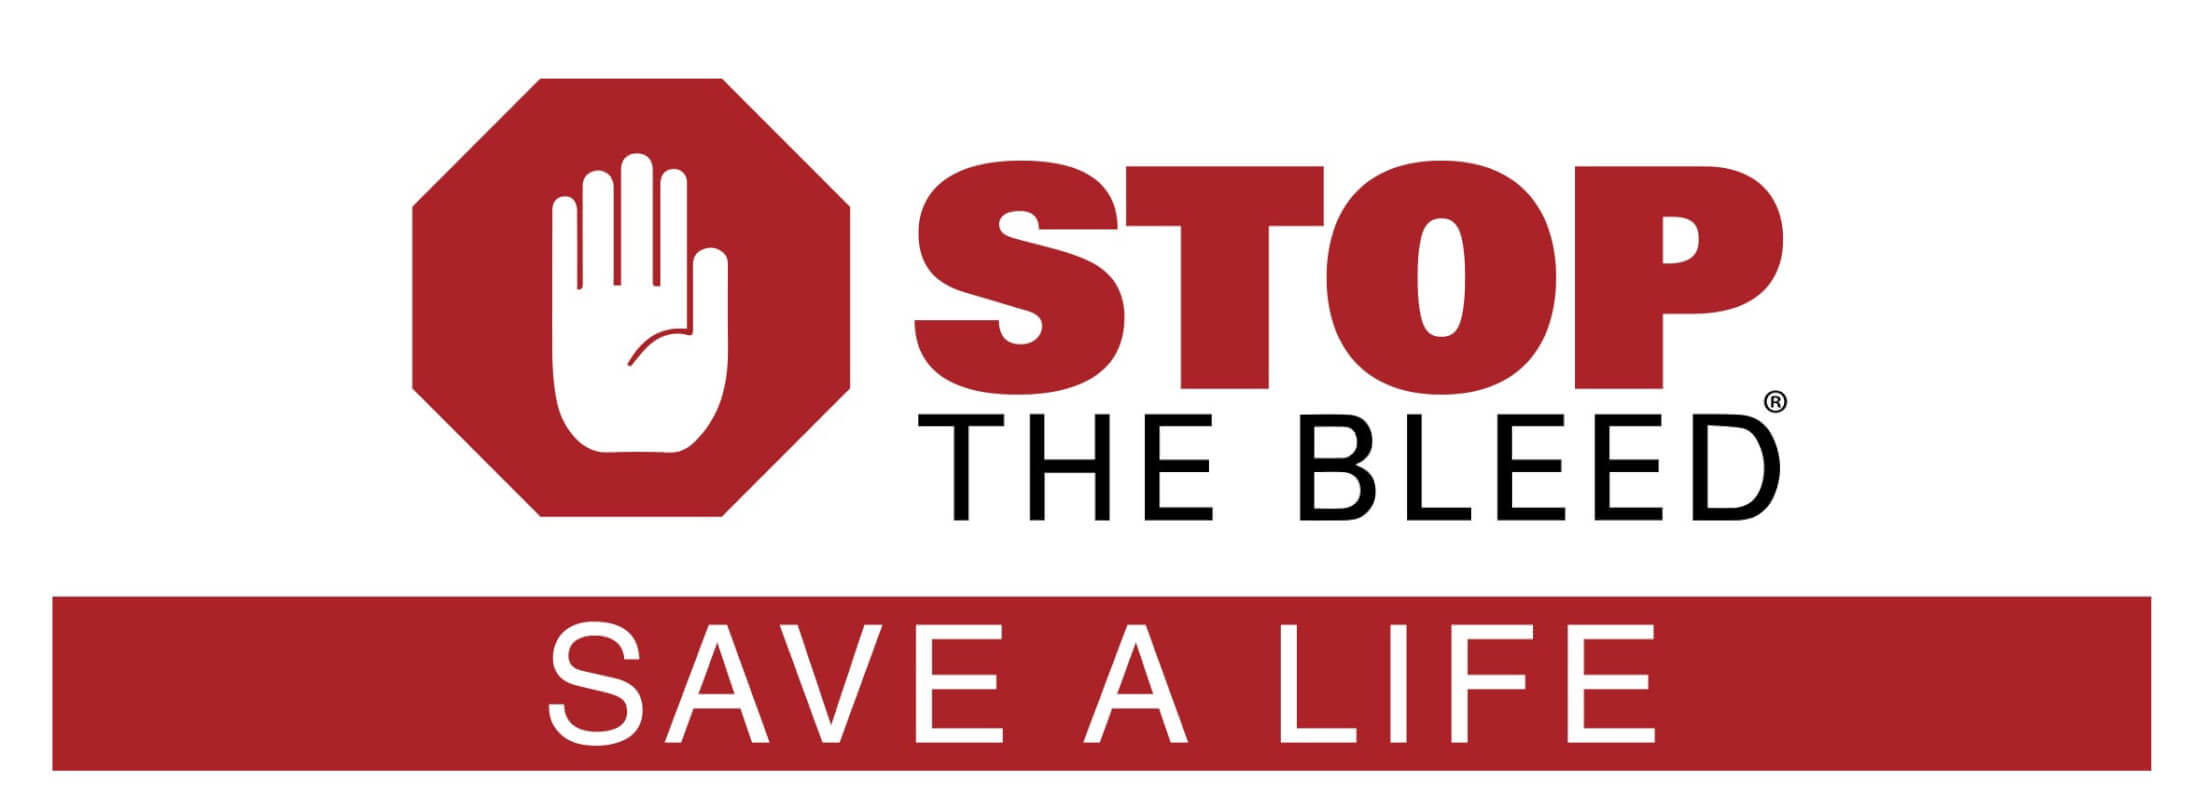 stop the bleed save a life graphic